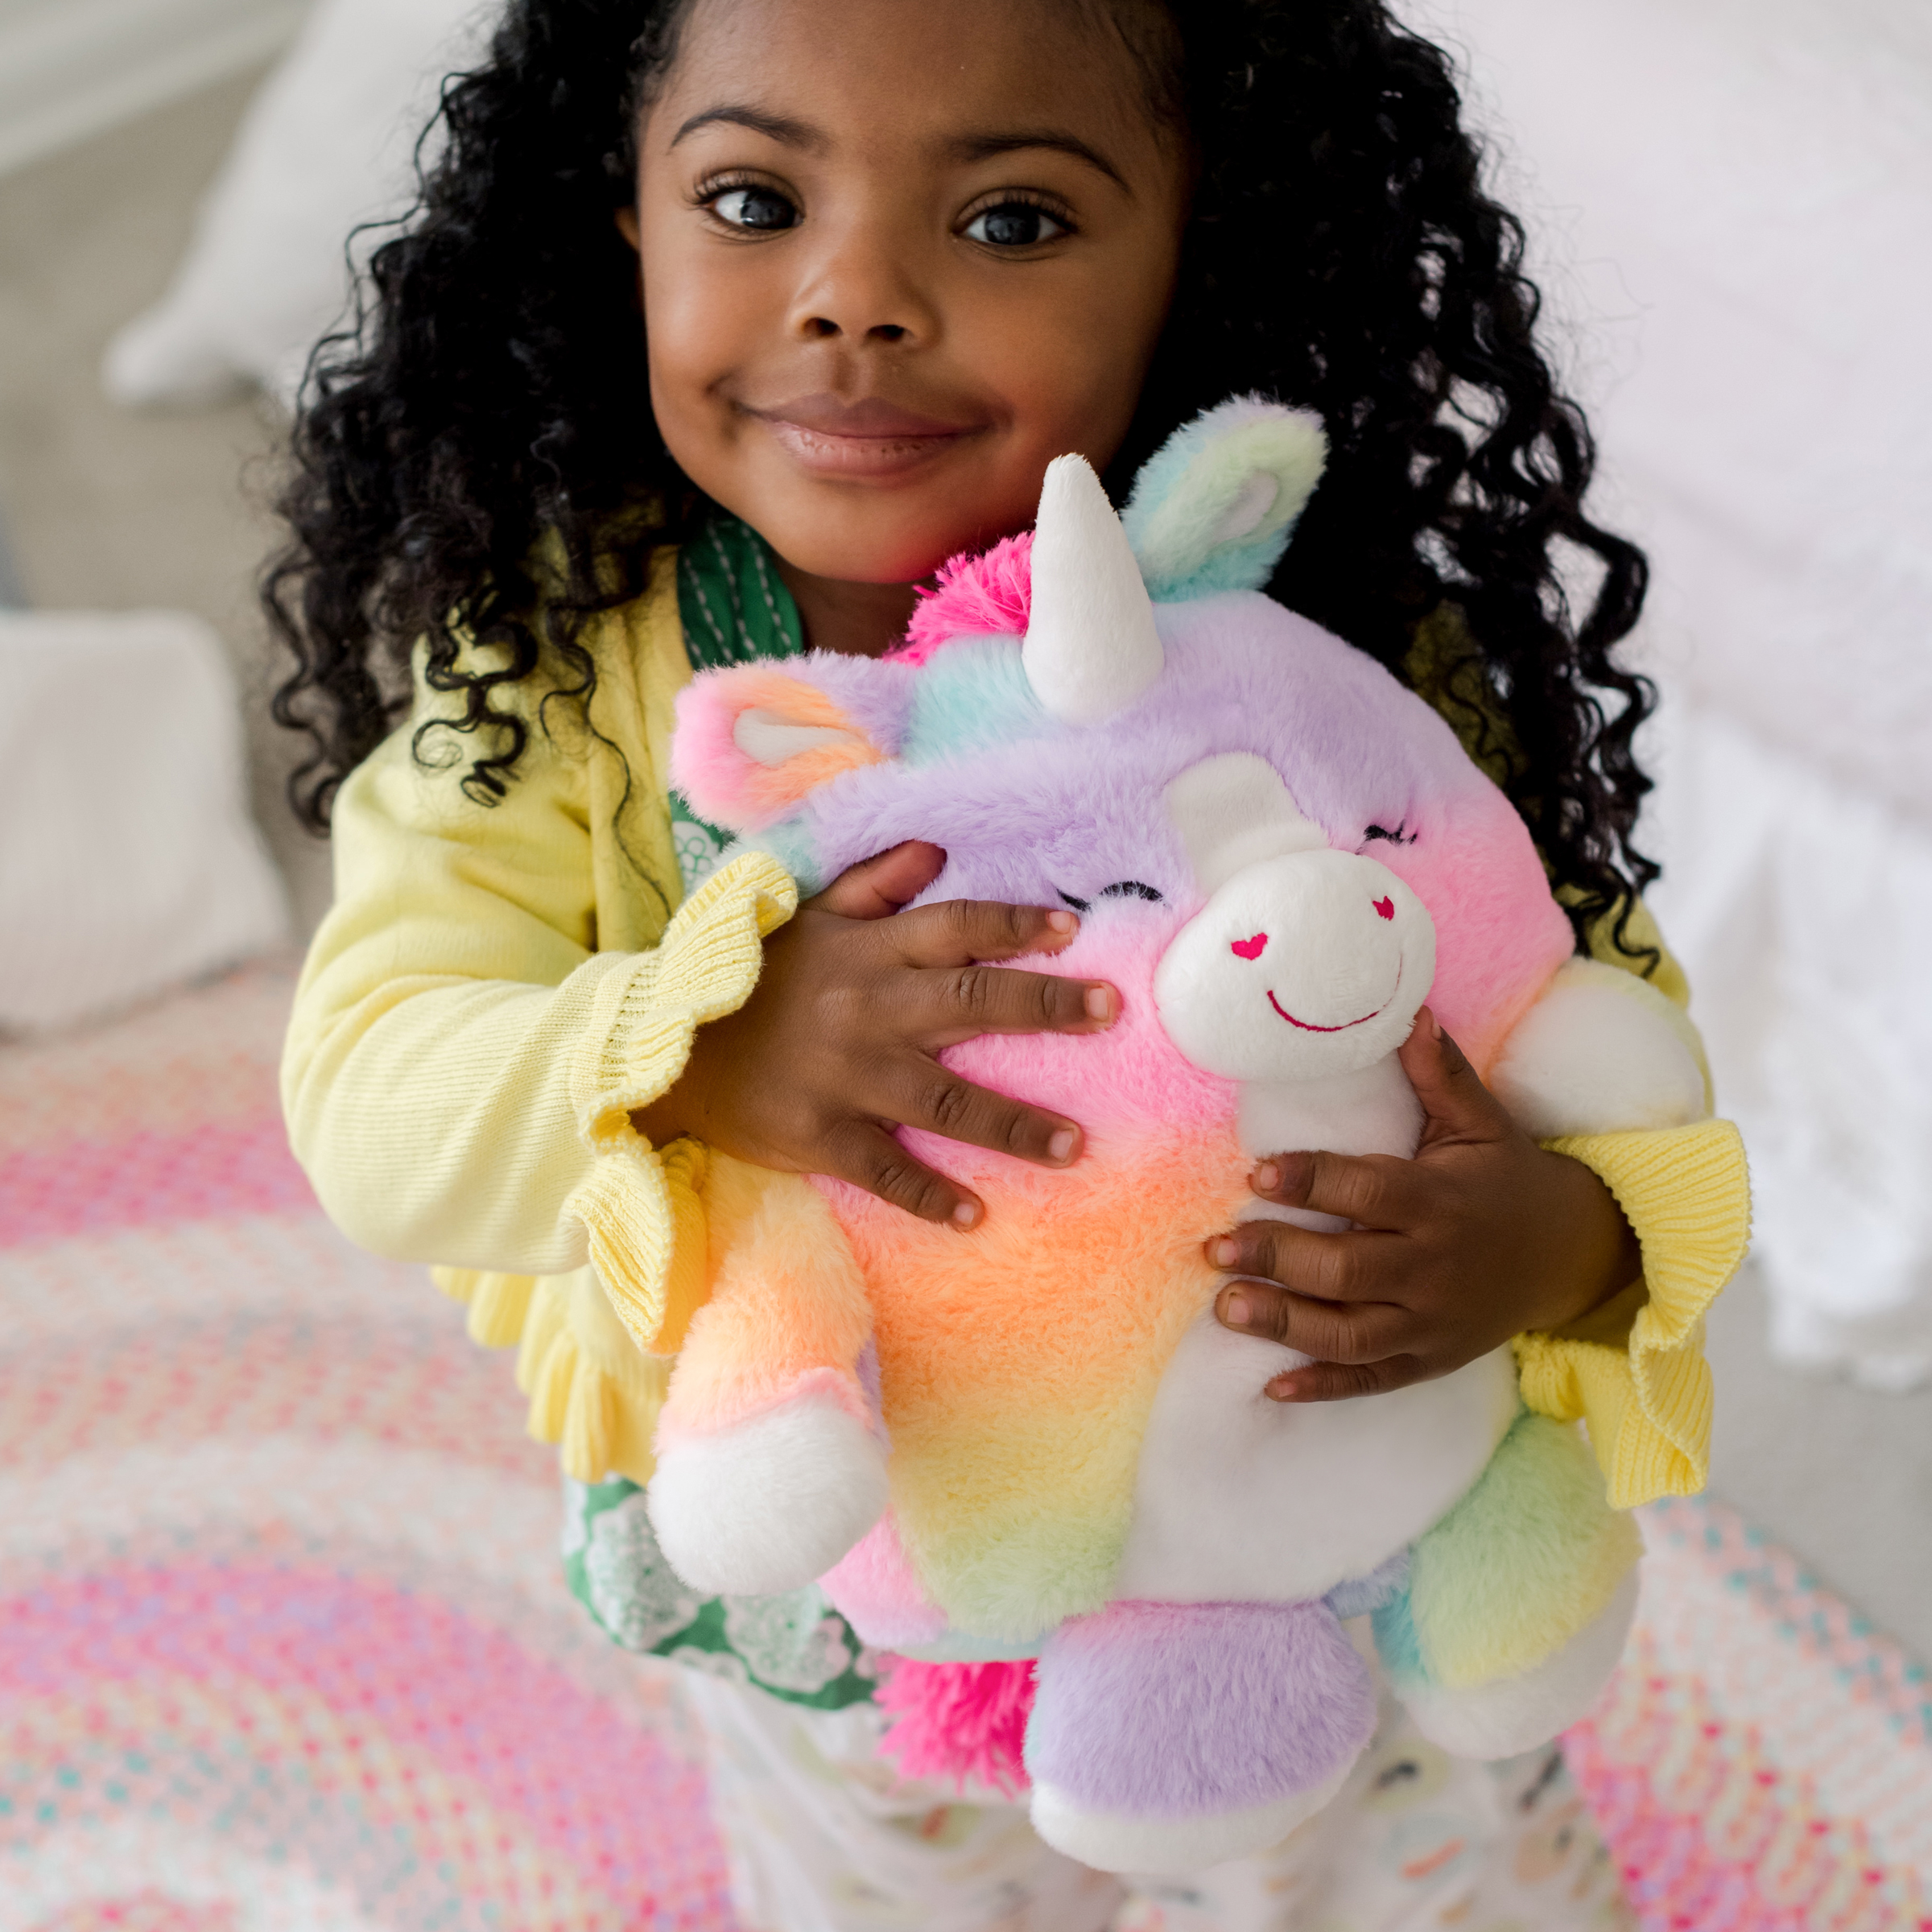 Animal Adventure® Wild for Style™ 2-in-1 Transformable Character Cape & Plush Pal – Unicorn - image 5 of 7